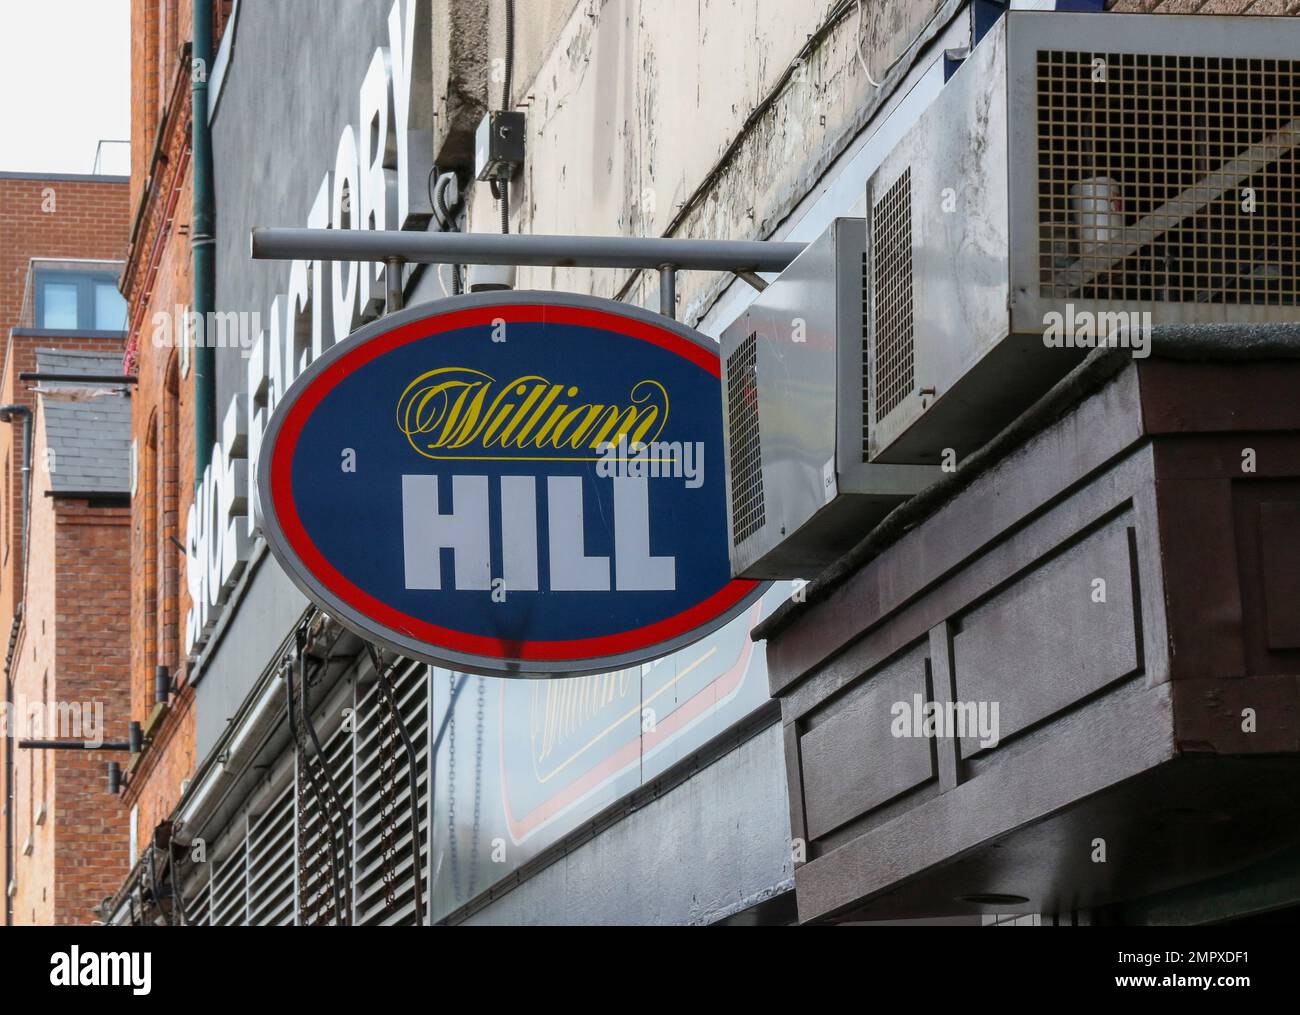 UK betting chain shop sign. William Hill sign on wall outside betting shop in UK. Stock Photo